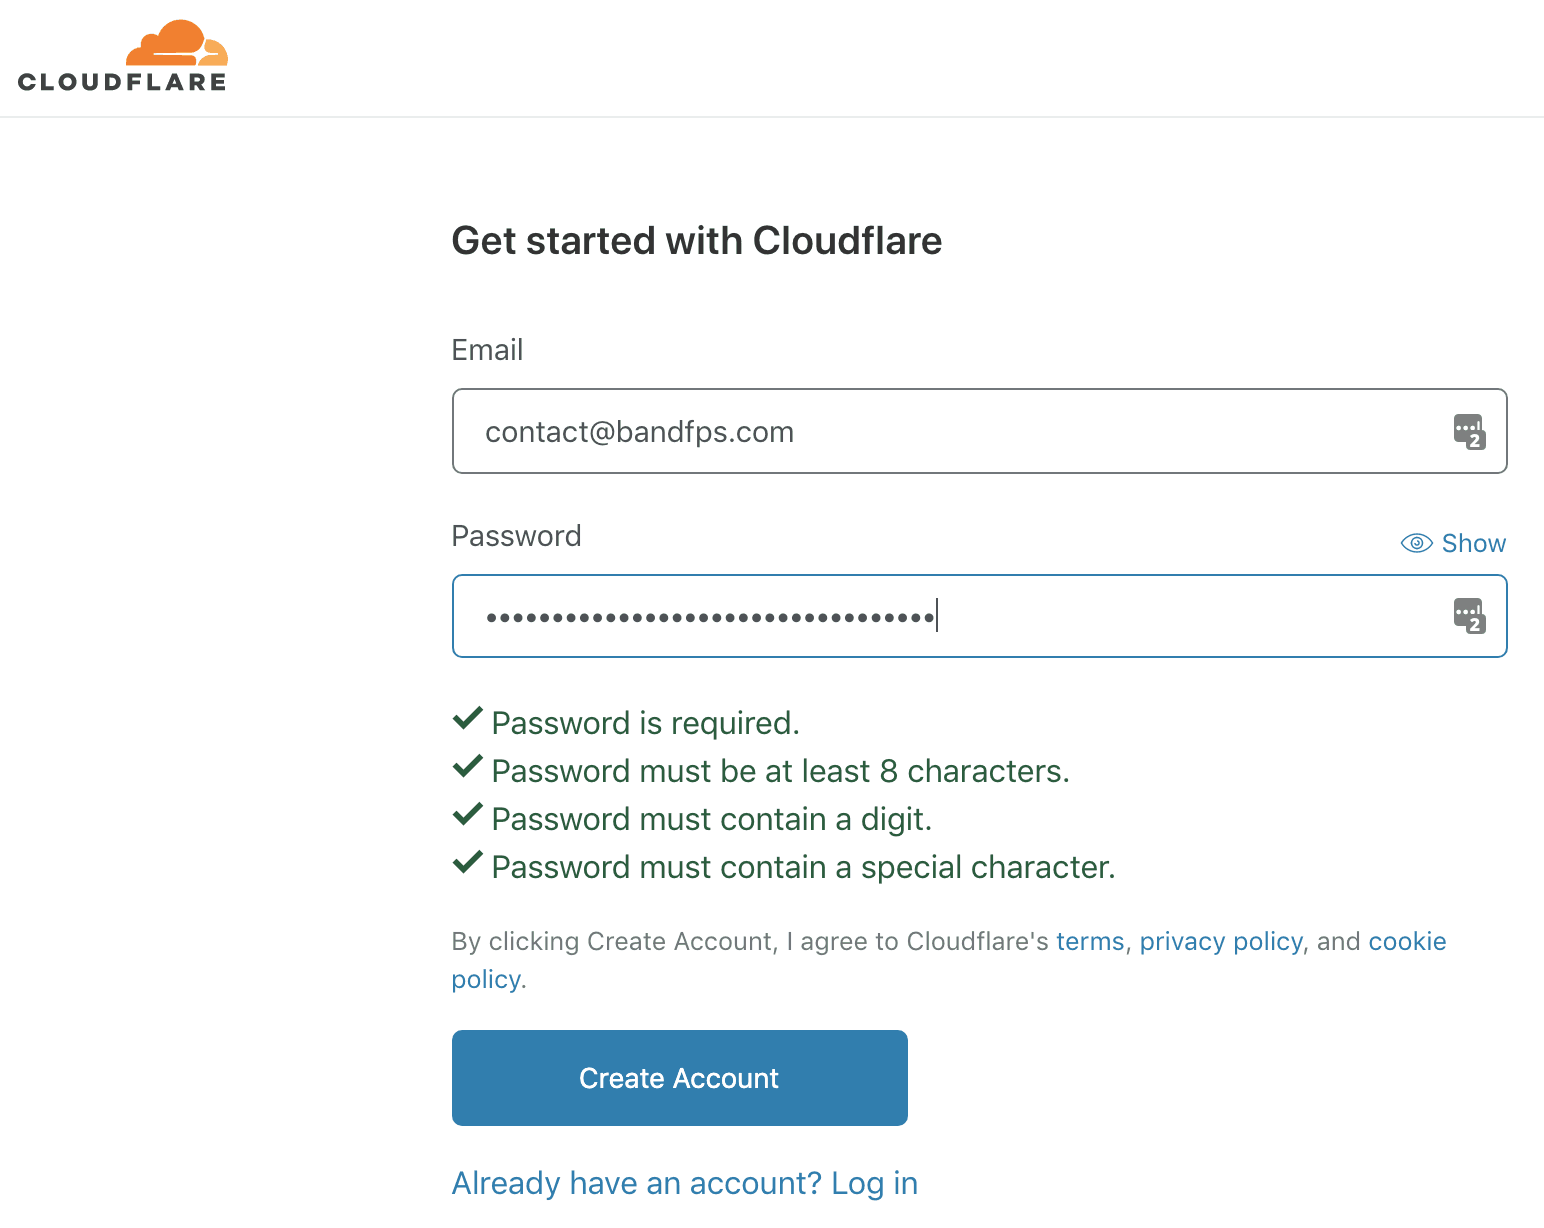 cloudflare sign up page